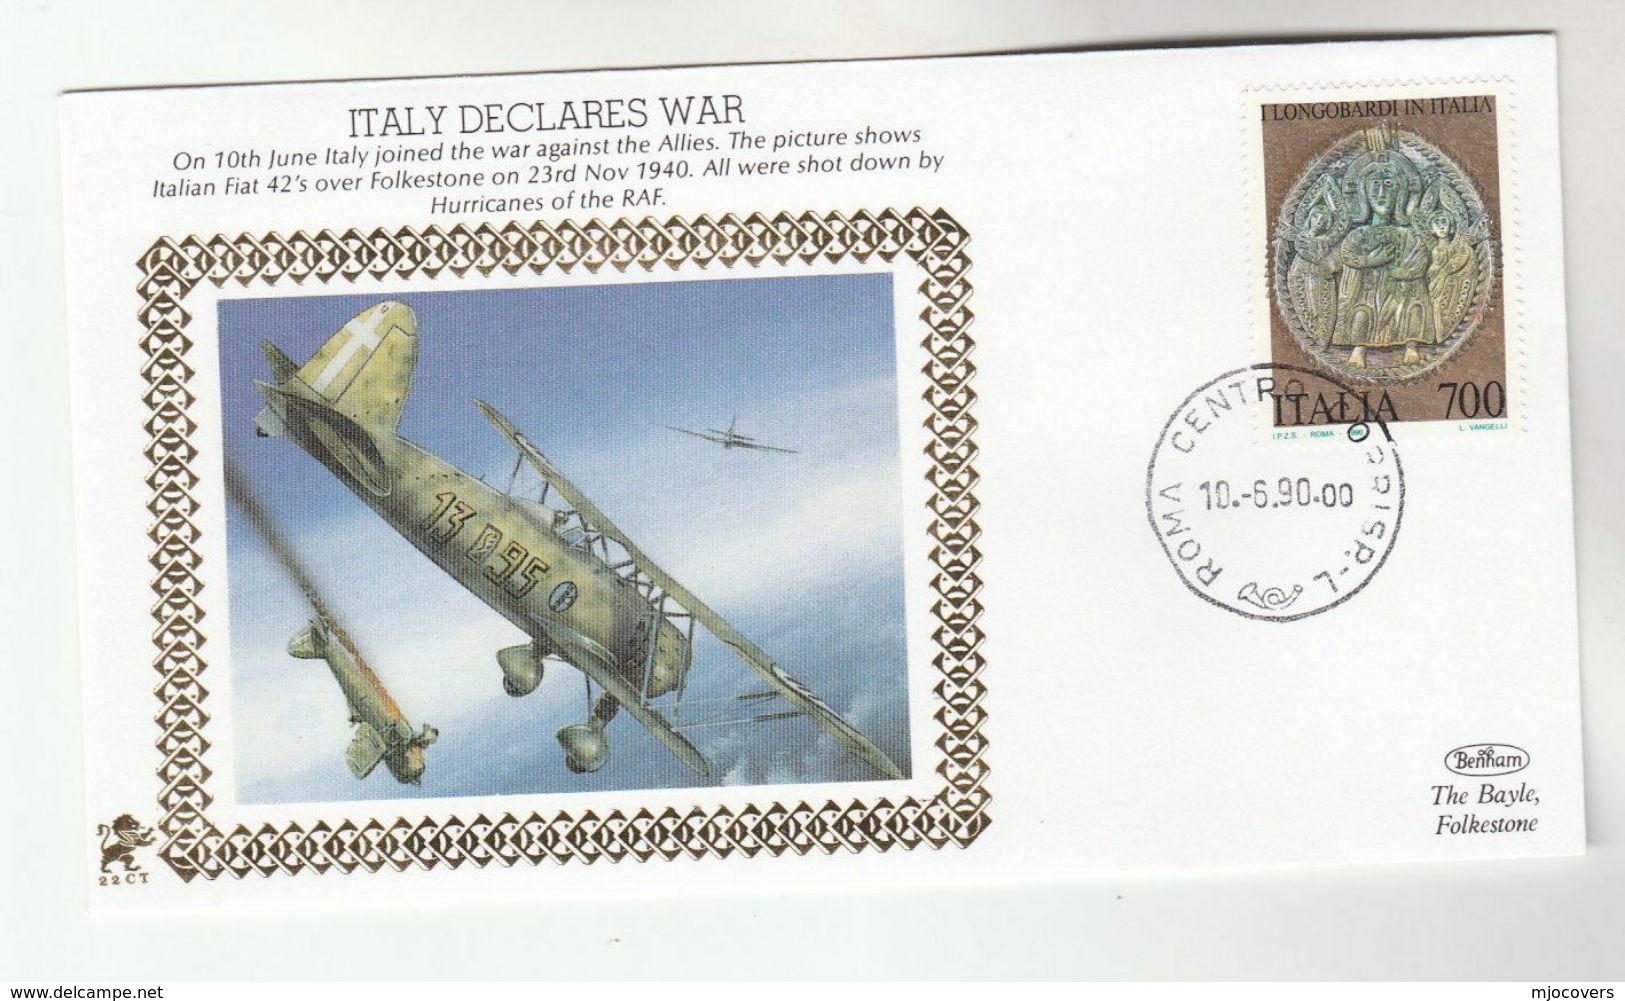 1990 ITALY Very Ltd EDITION COVER Anniv WAR DECLARED, RAF SHOOT DOWN FIAT 42 AIRCRAFT  WWII Event Stamps - WW2